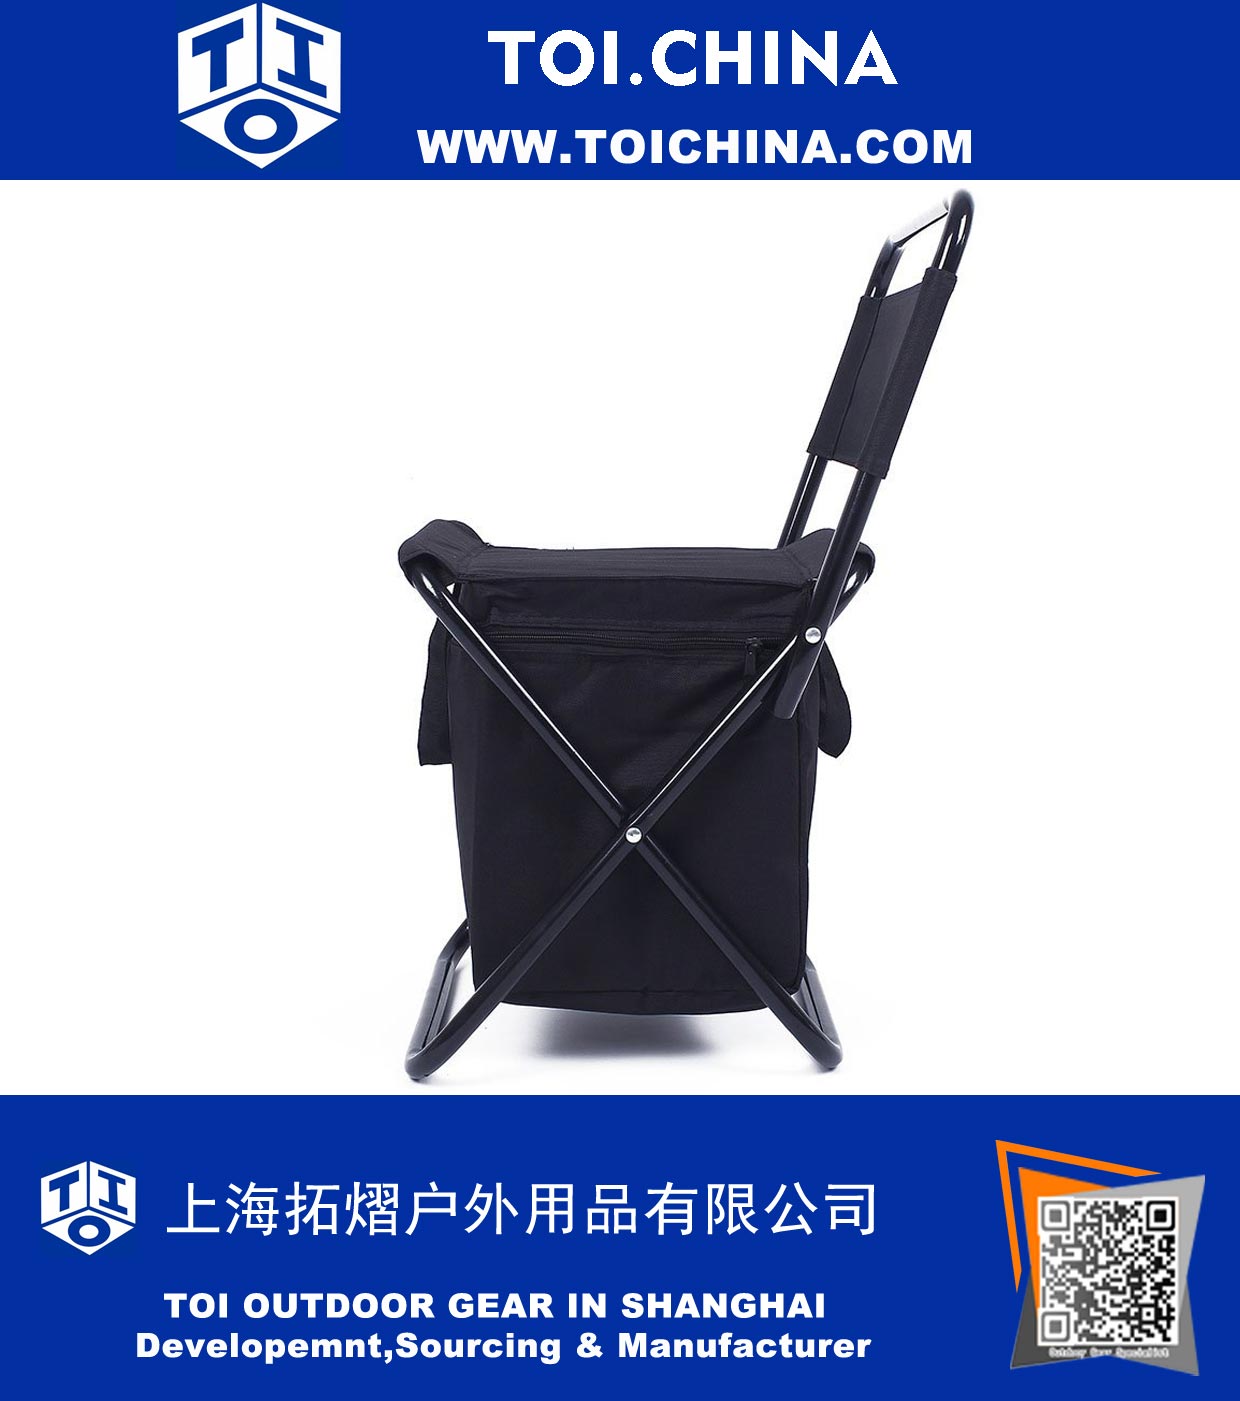 Foldable Chair With cooler bag For Camping, Fishing, Watching Sports Events, Tailgating, Hiking, Picnics